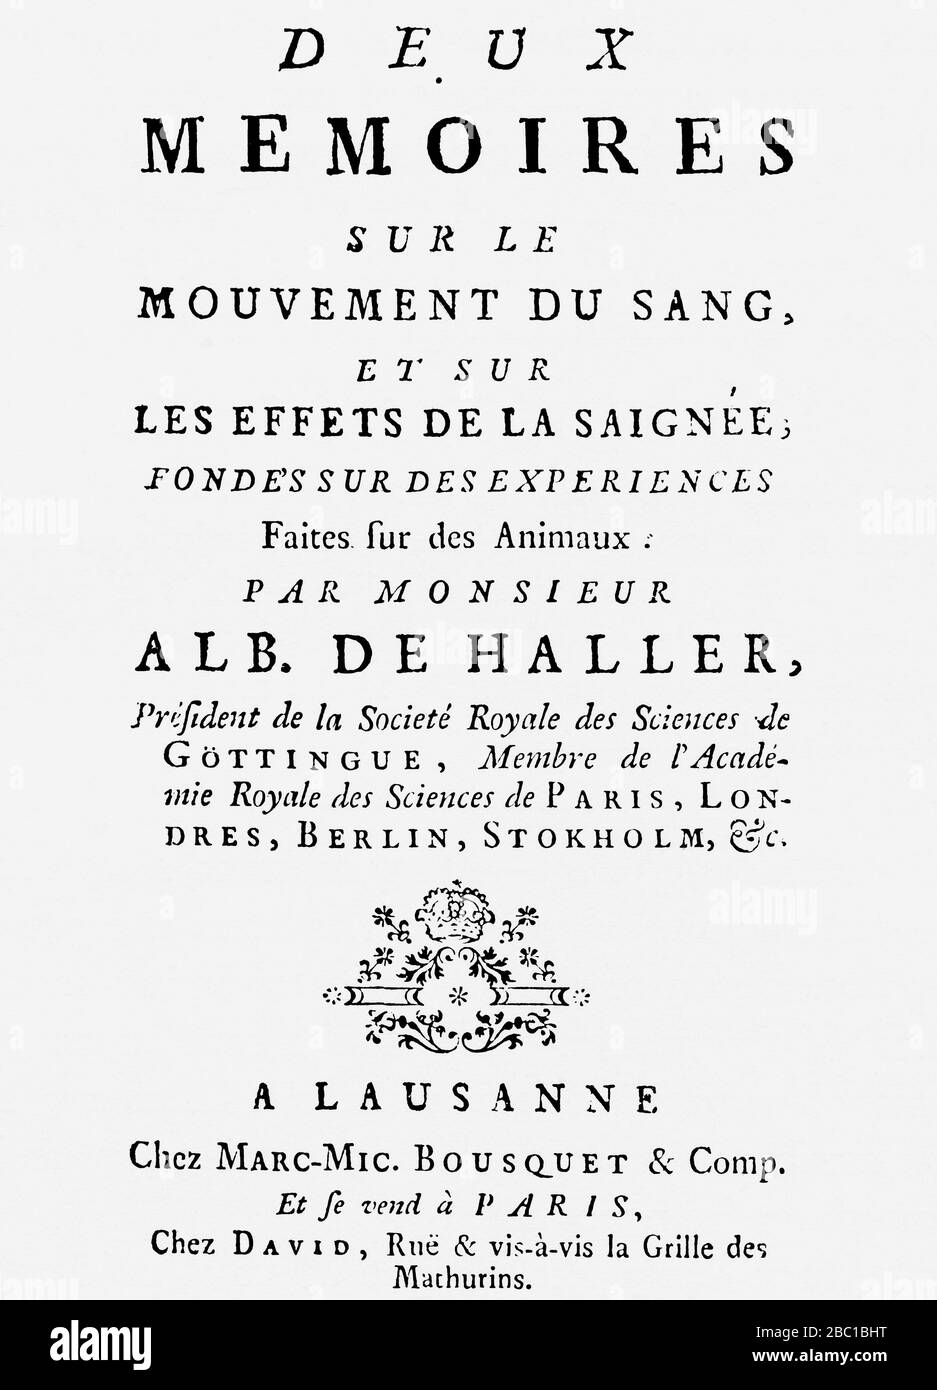 Title page of Haller's Deux memoires sur le mouvement du sang, 1756, in which are recorded his observations on the capillaries. Albrecht von Haller, aka Albertus de Haller, 1708 – 1777.  Swiss anatomist, physiologist, naturalist, encyclopedist, bibliographer and poet, he is often referred to as the father of modern physiology.  From Selected Readings in the History of Physiology, published 1930. Stock Photo